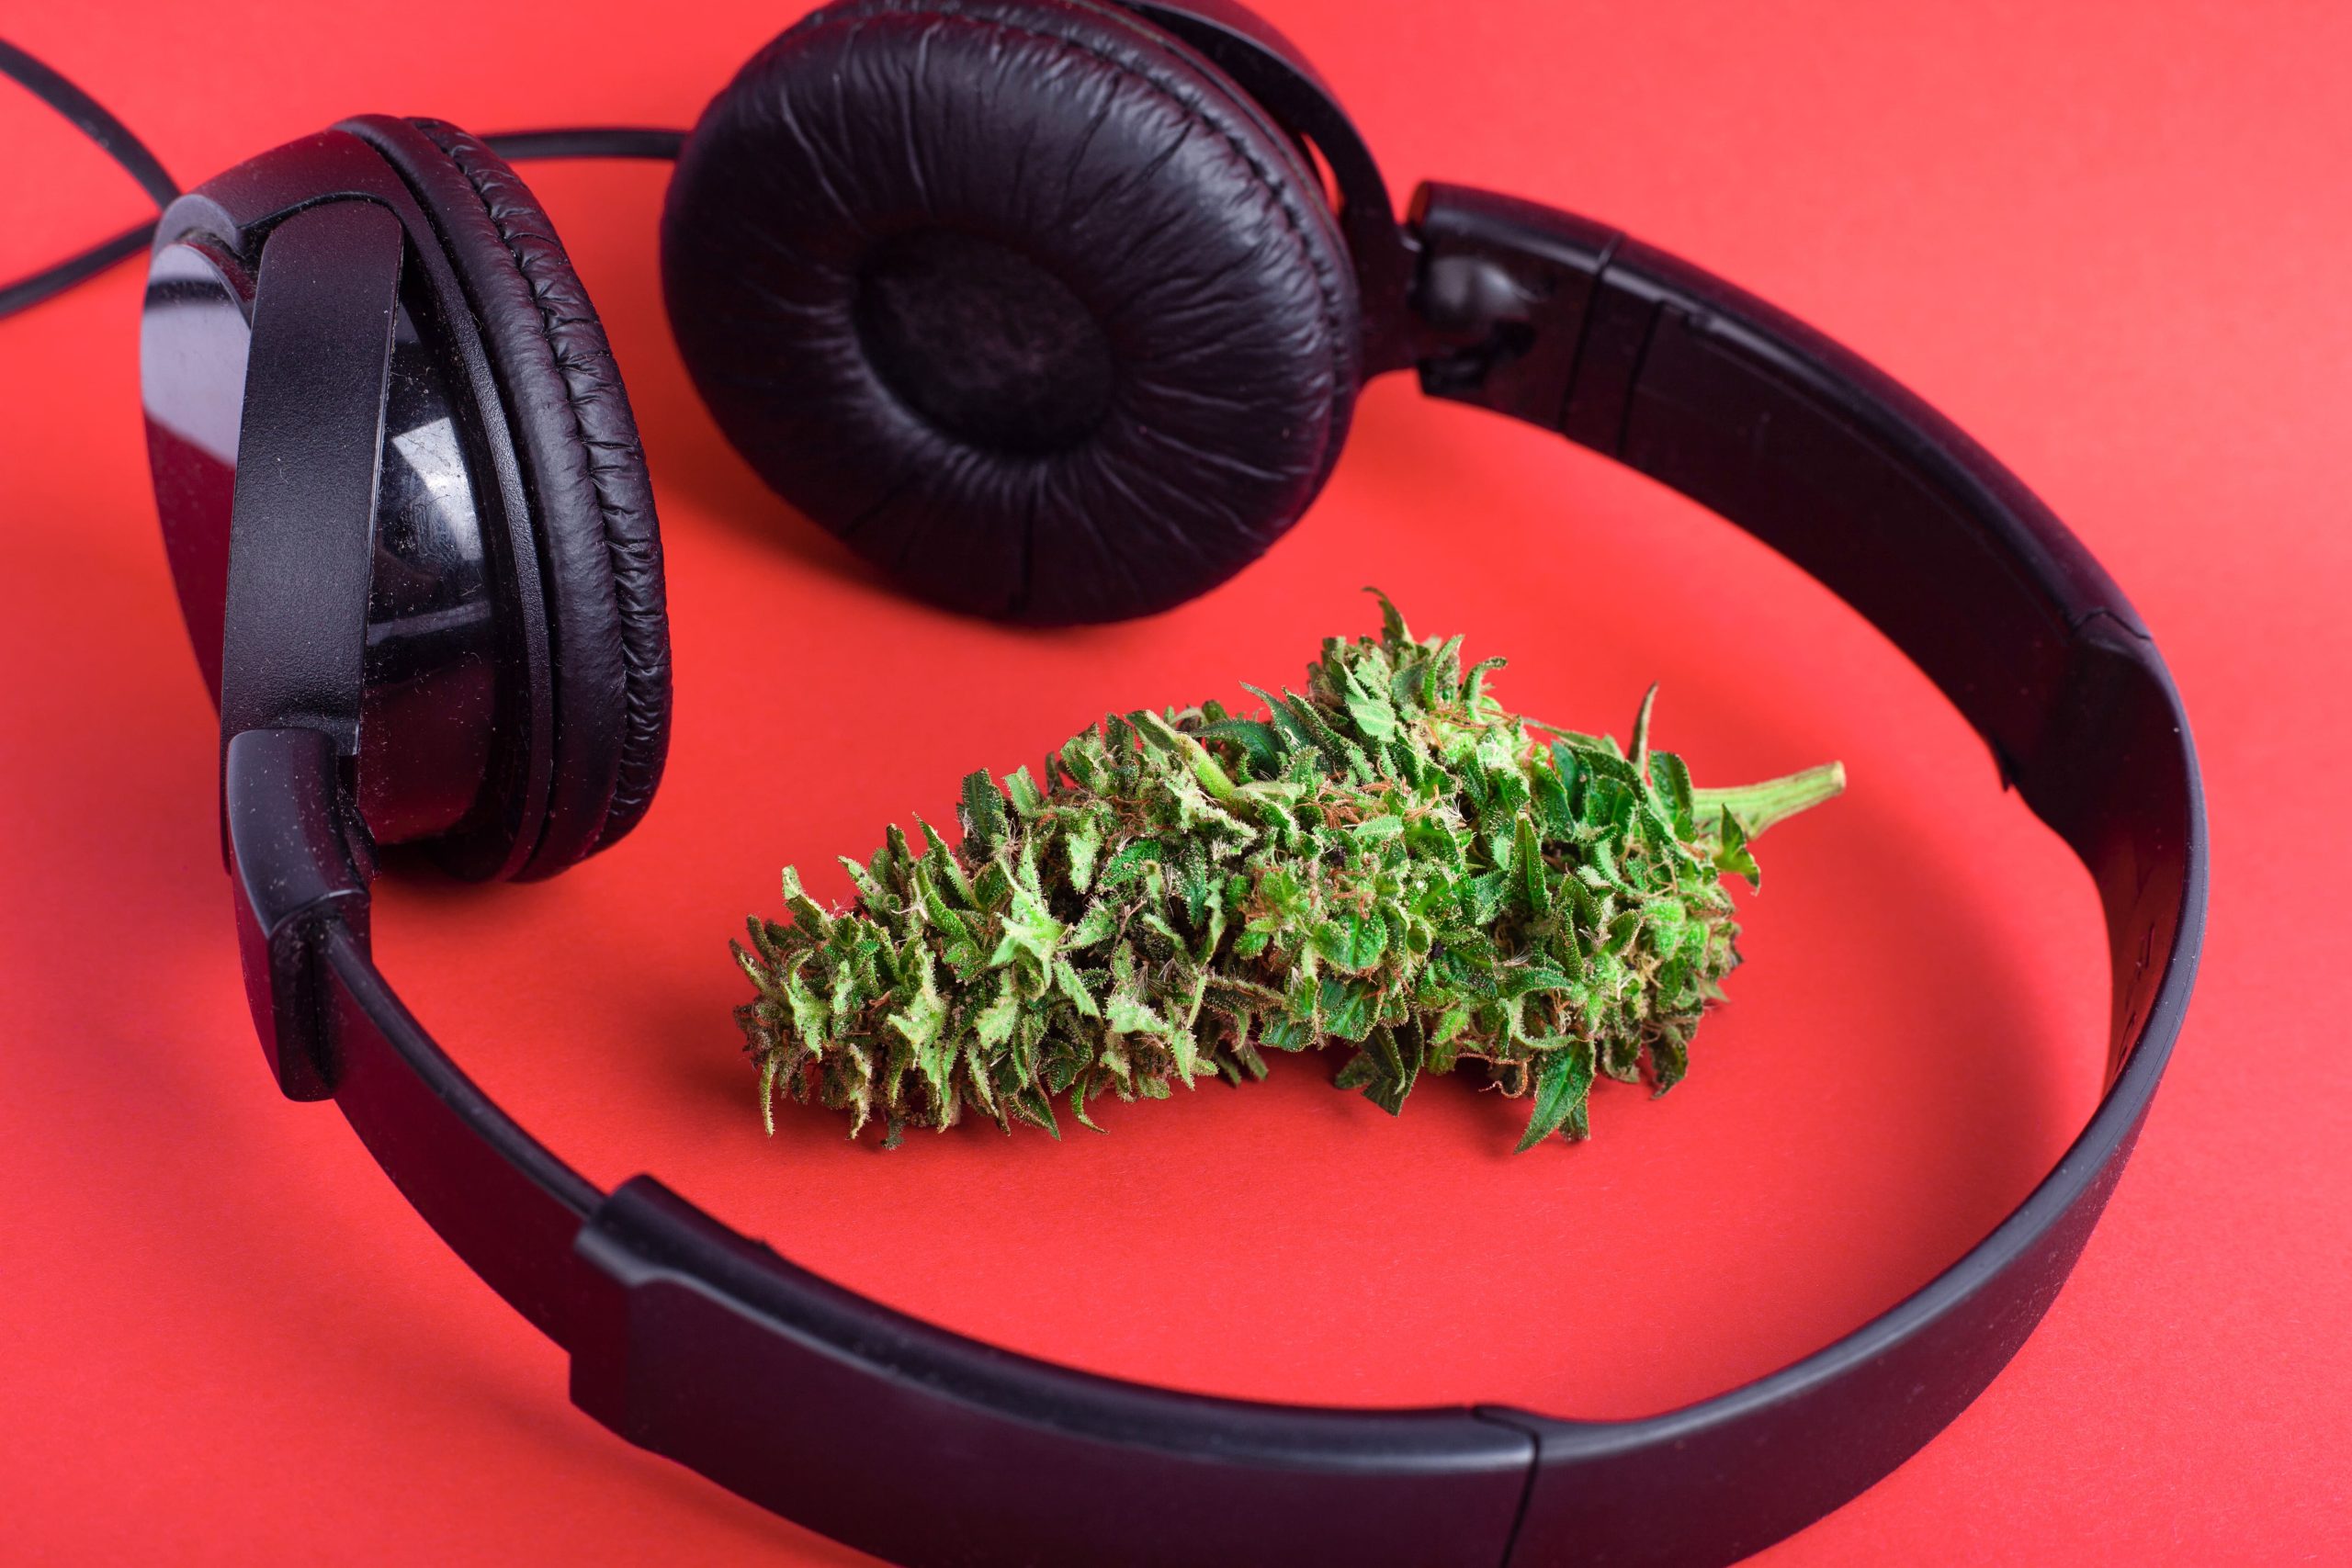 cannabis buds next to a pair of headphones